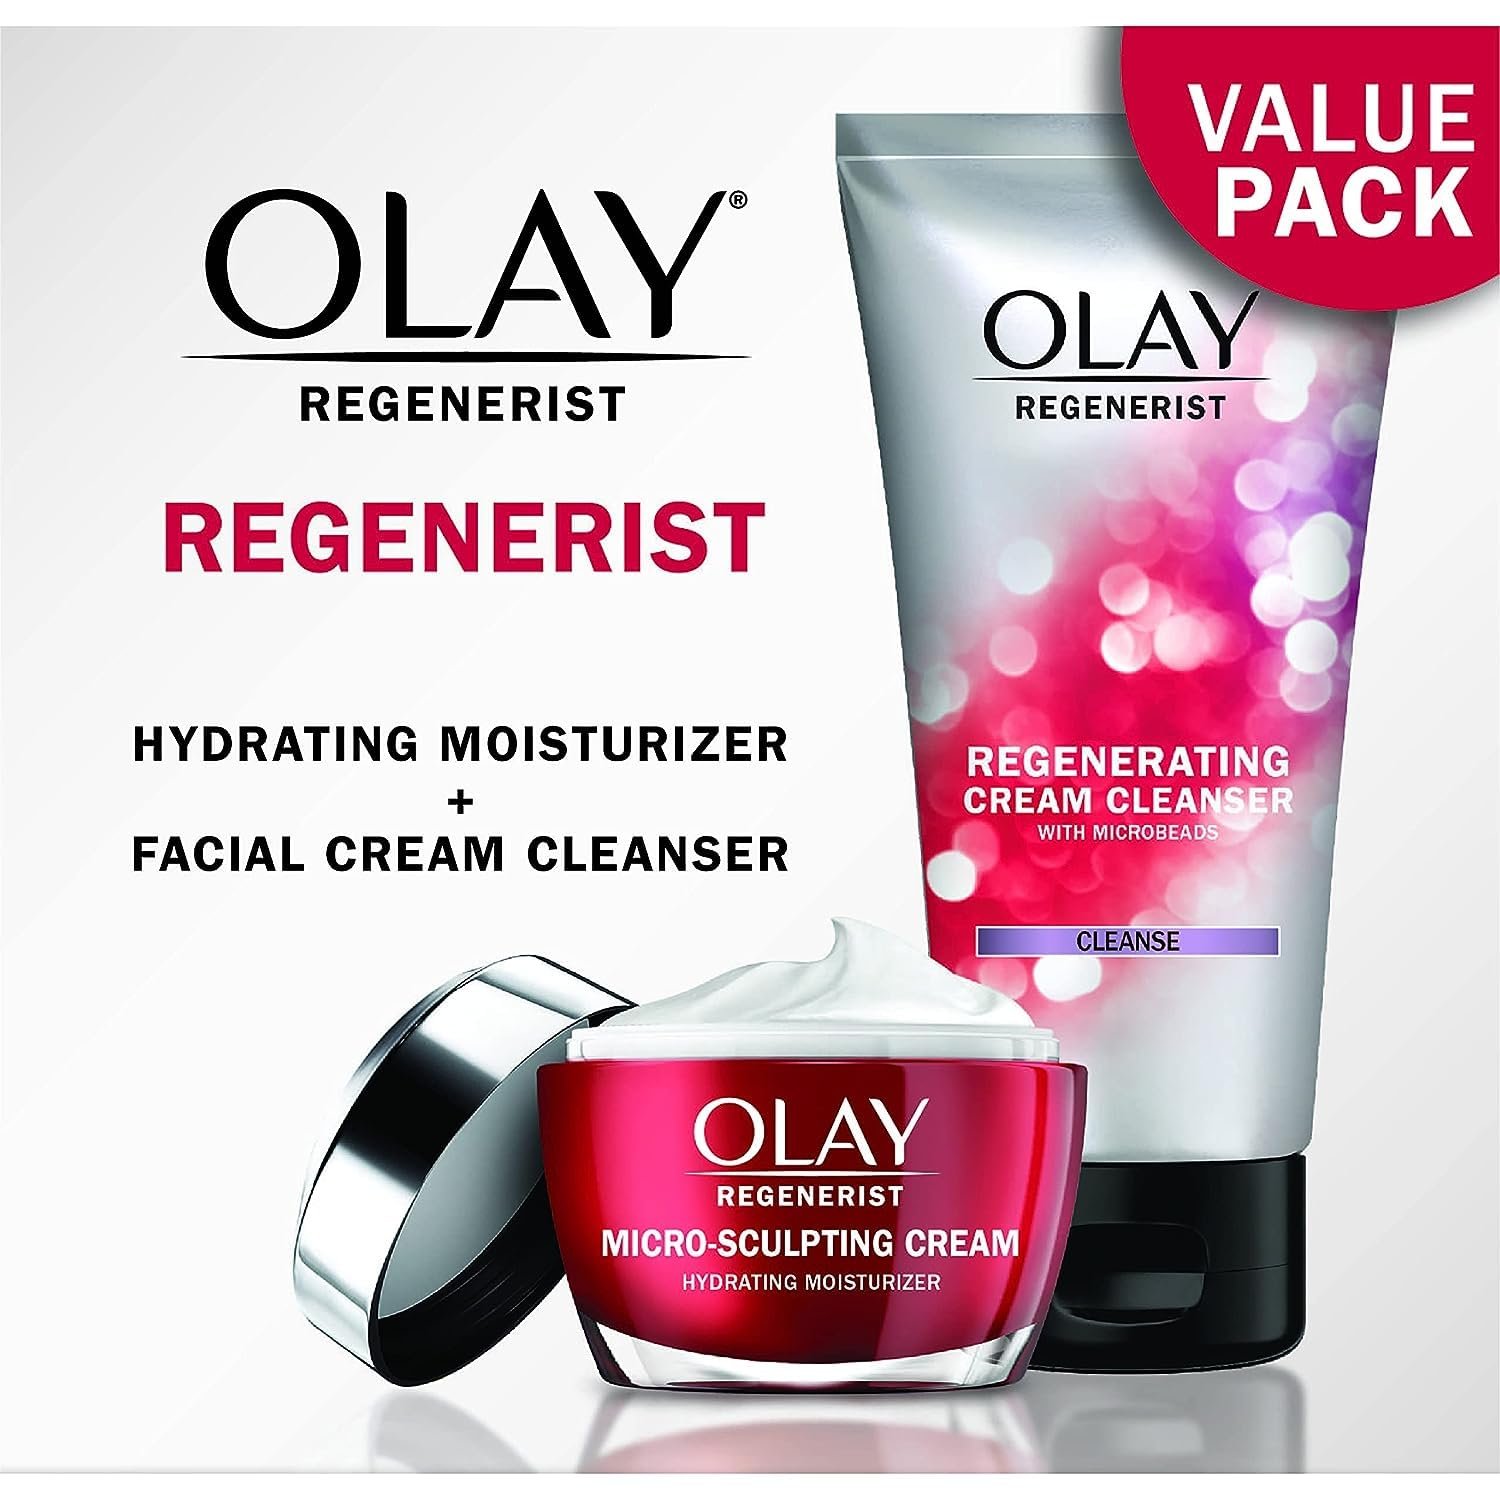 "Pamper your skin: Embrace the regenerating magic of Olay Face Wash today!"